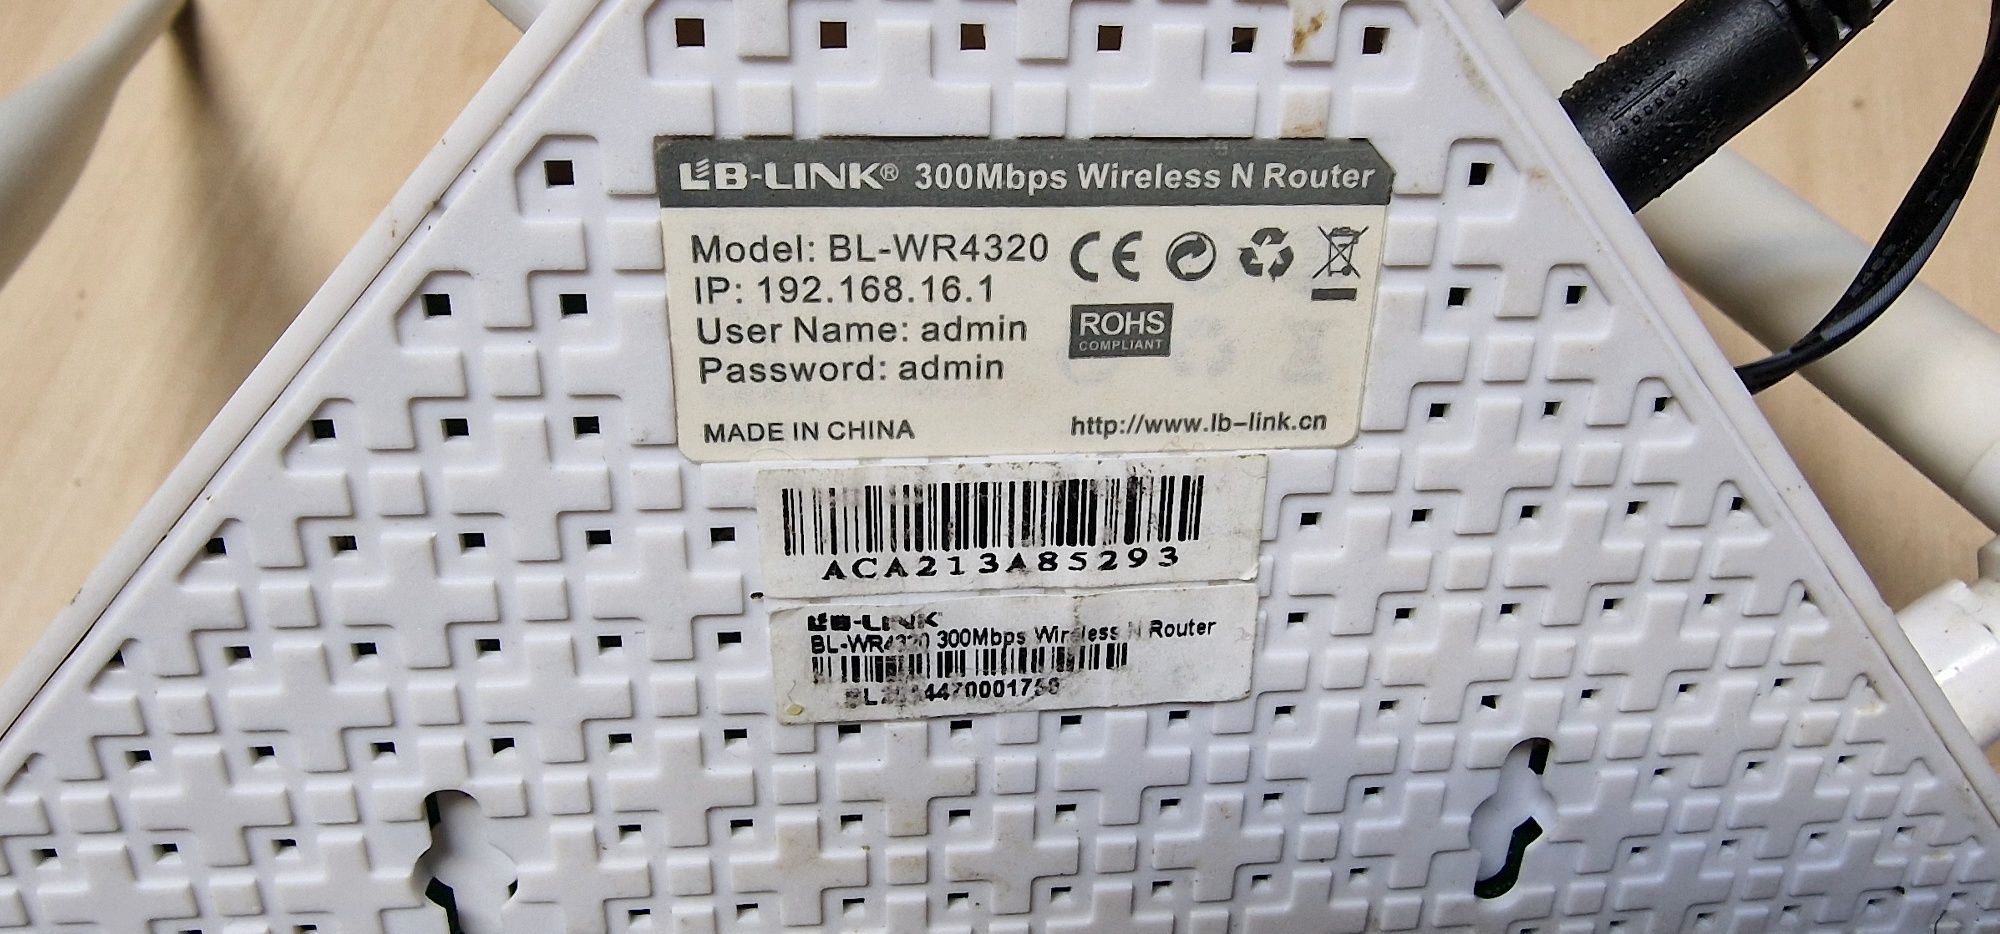 Router Wireless Lb Link